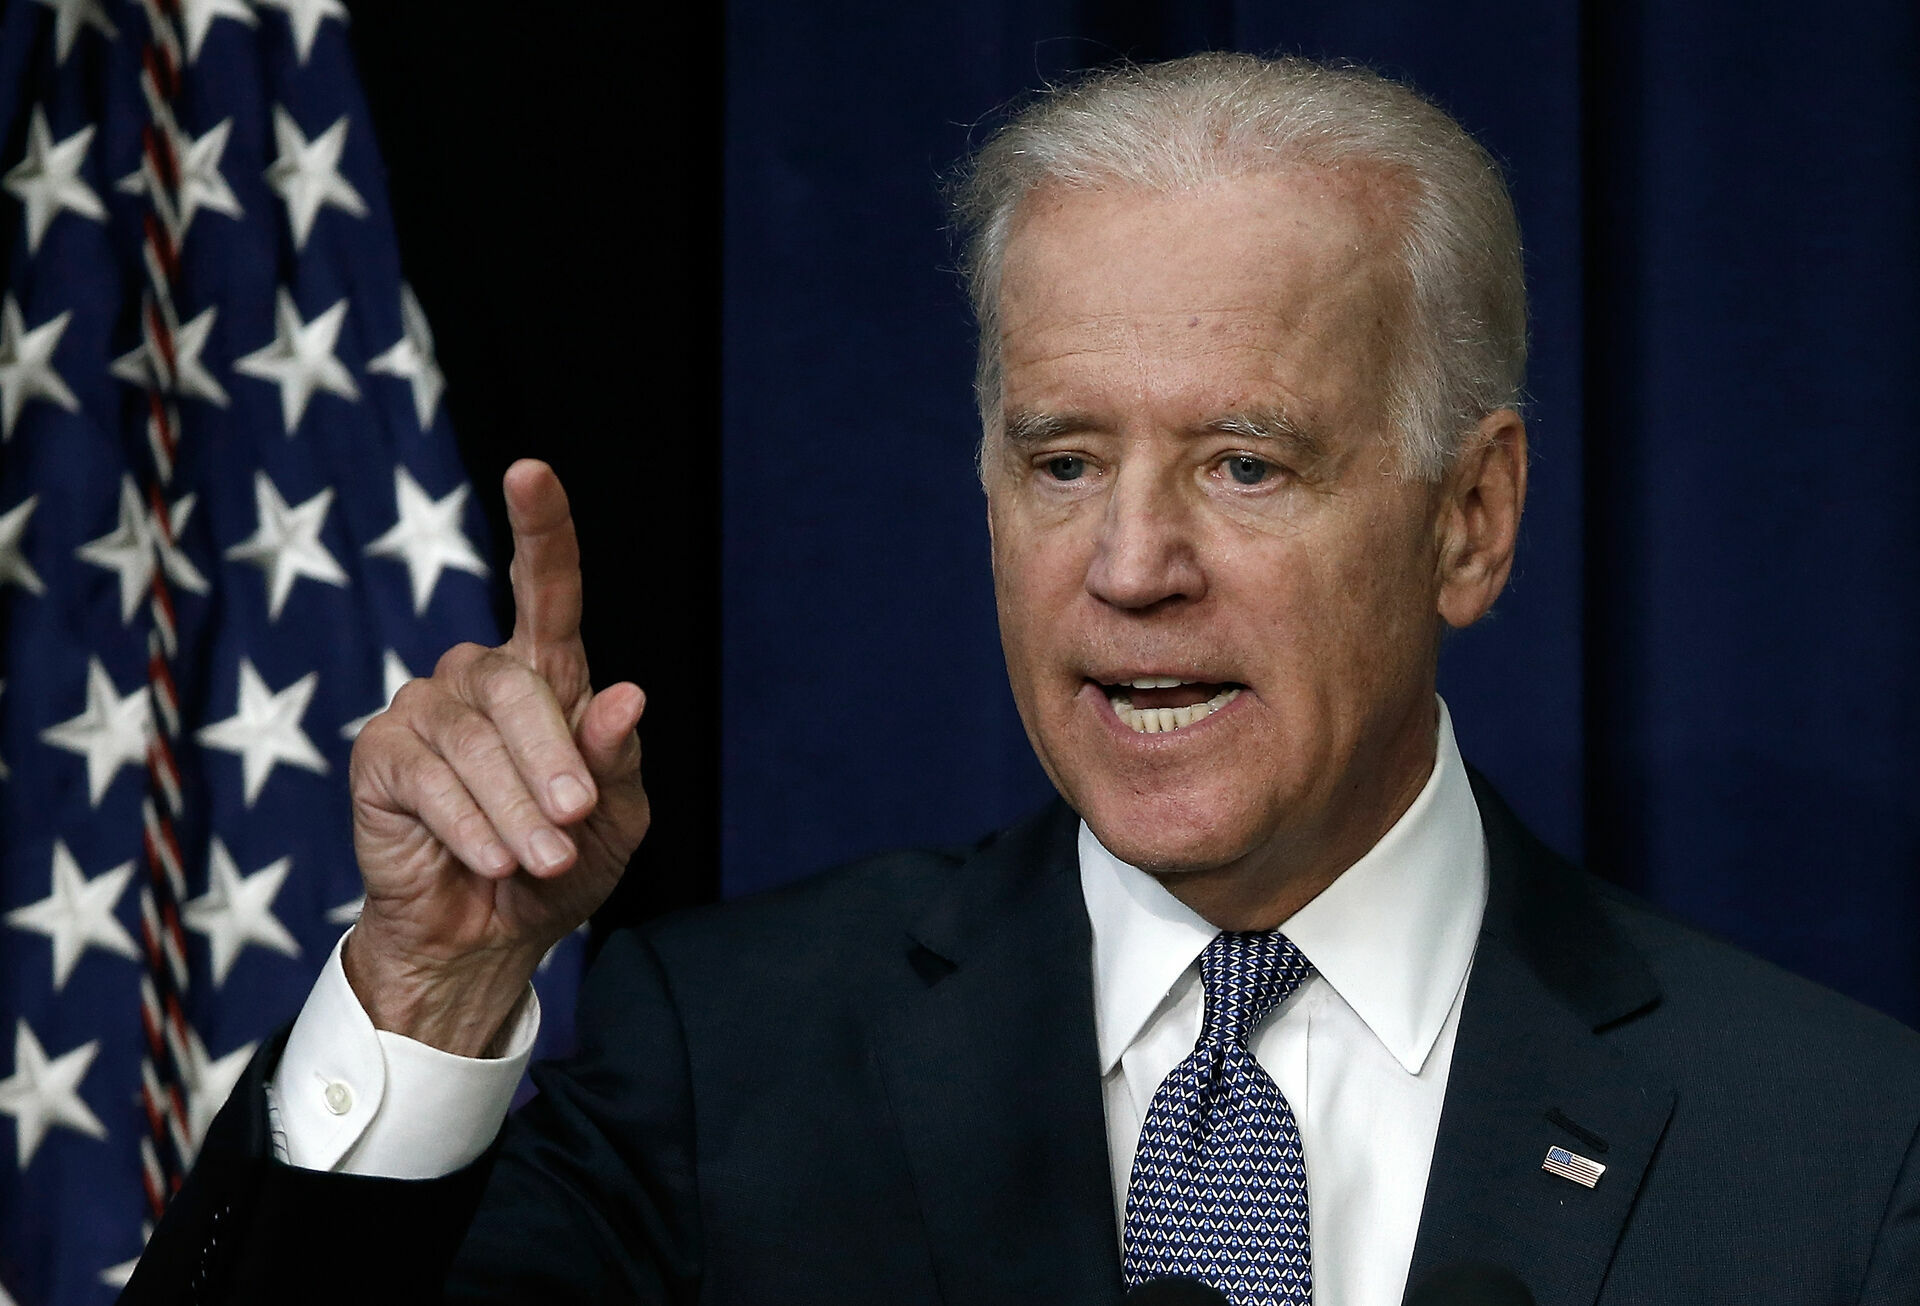 Question of the day: Will Biden become Putin's main enemy?